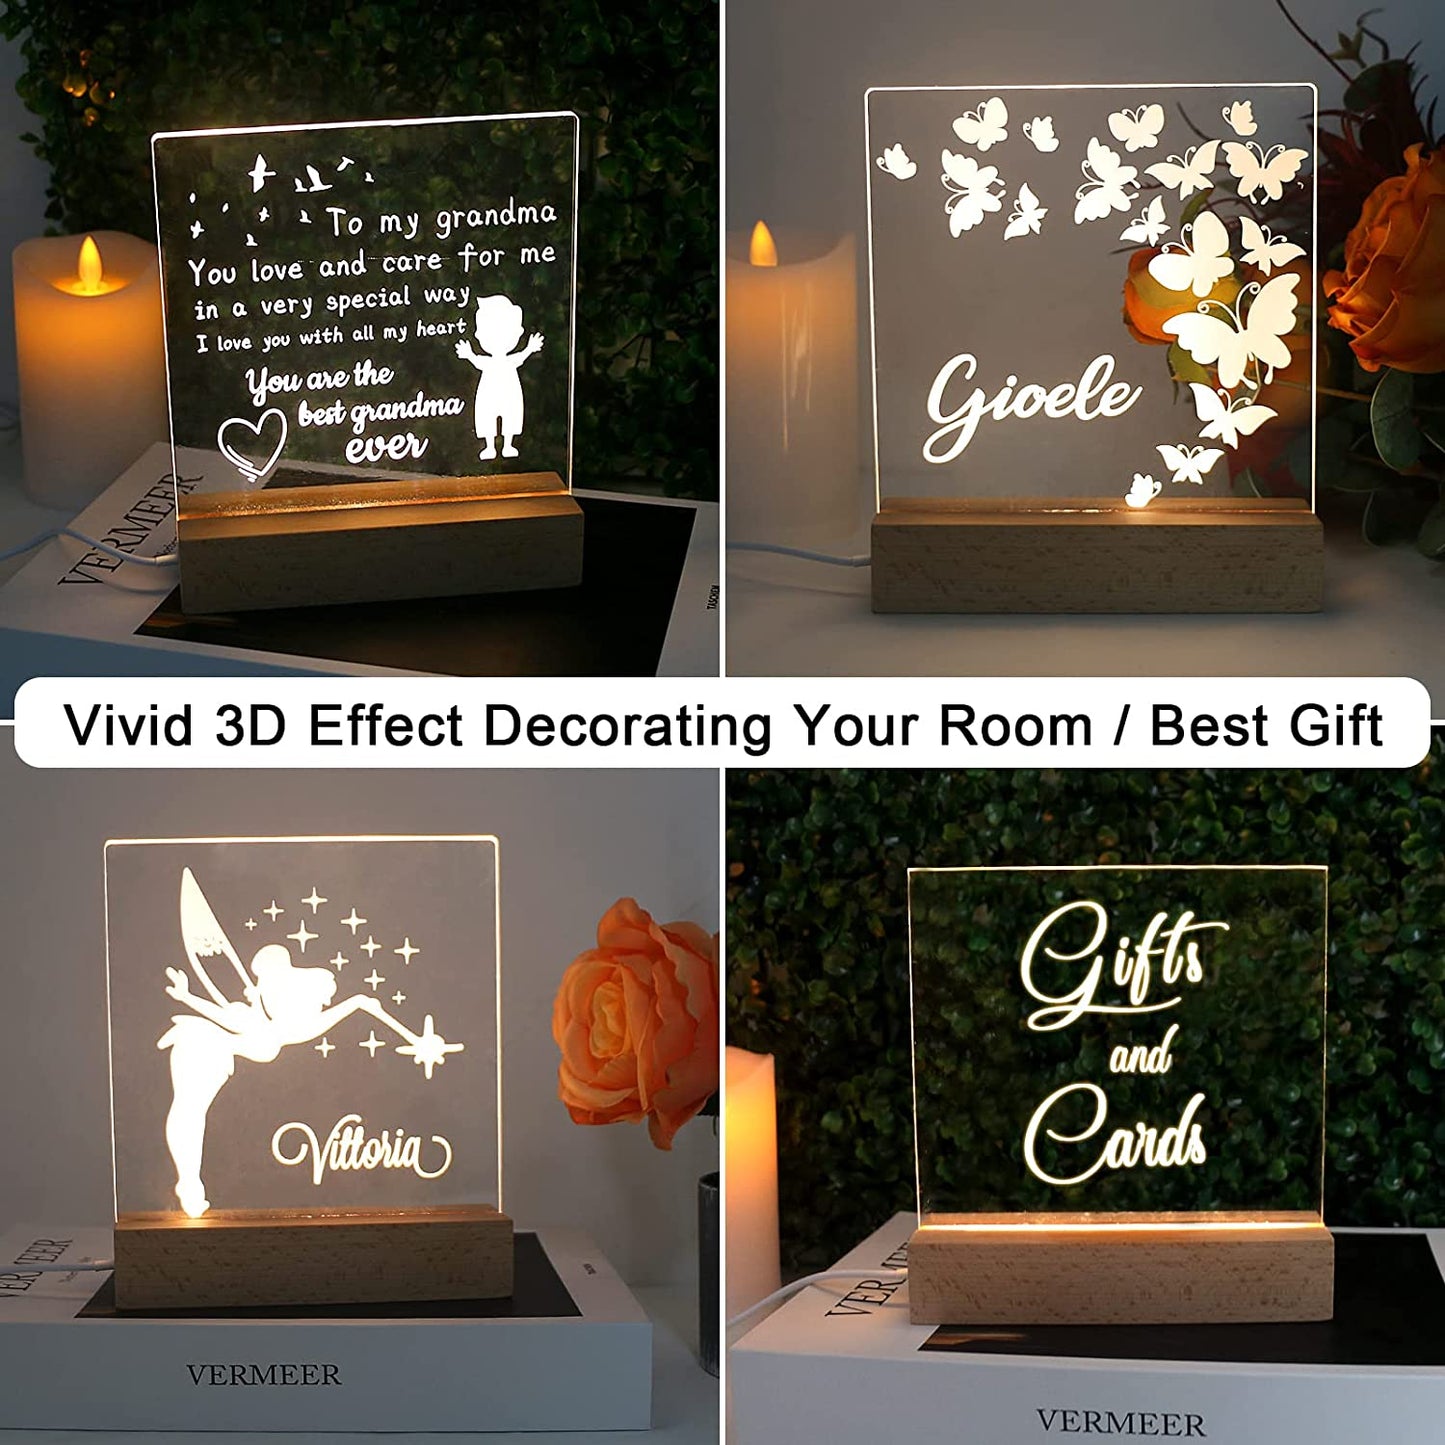 Pack of 4 LED Wooden Display Base with Acrylic Sheets -- 6 inch Rectangle LED Light Base Acrylic Blanks Display Stand Pedestal Warm Lights for Office Bar Room Cafe Home Decor